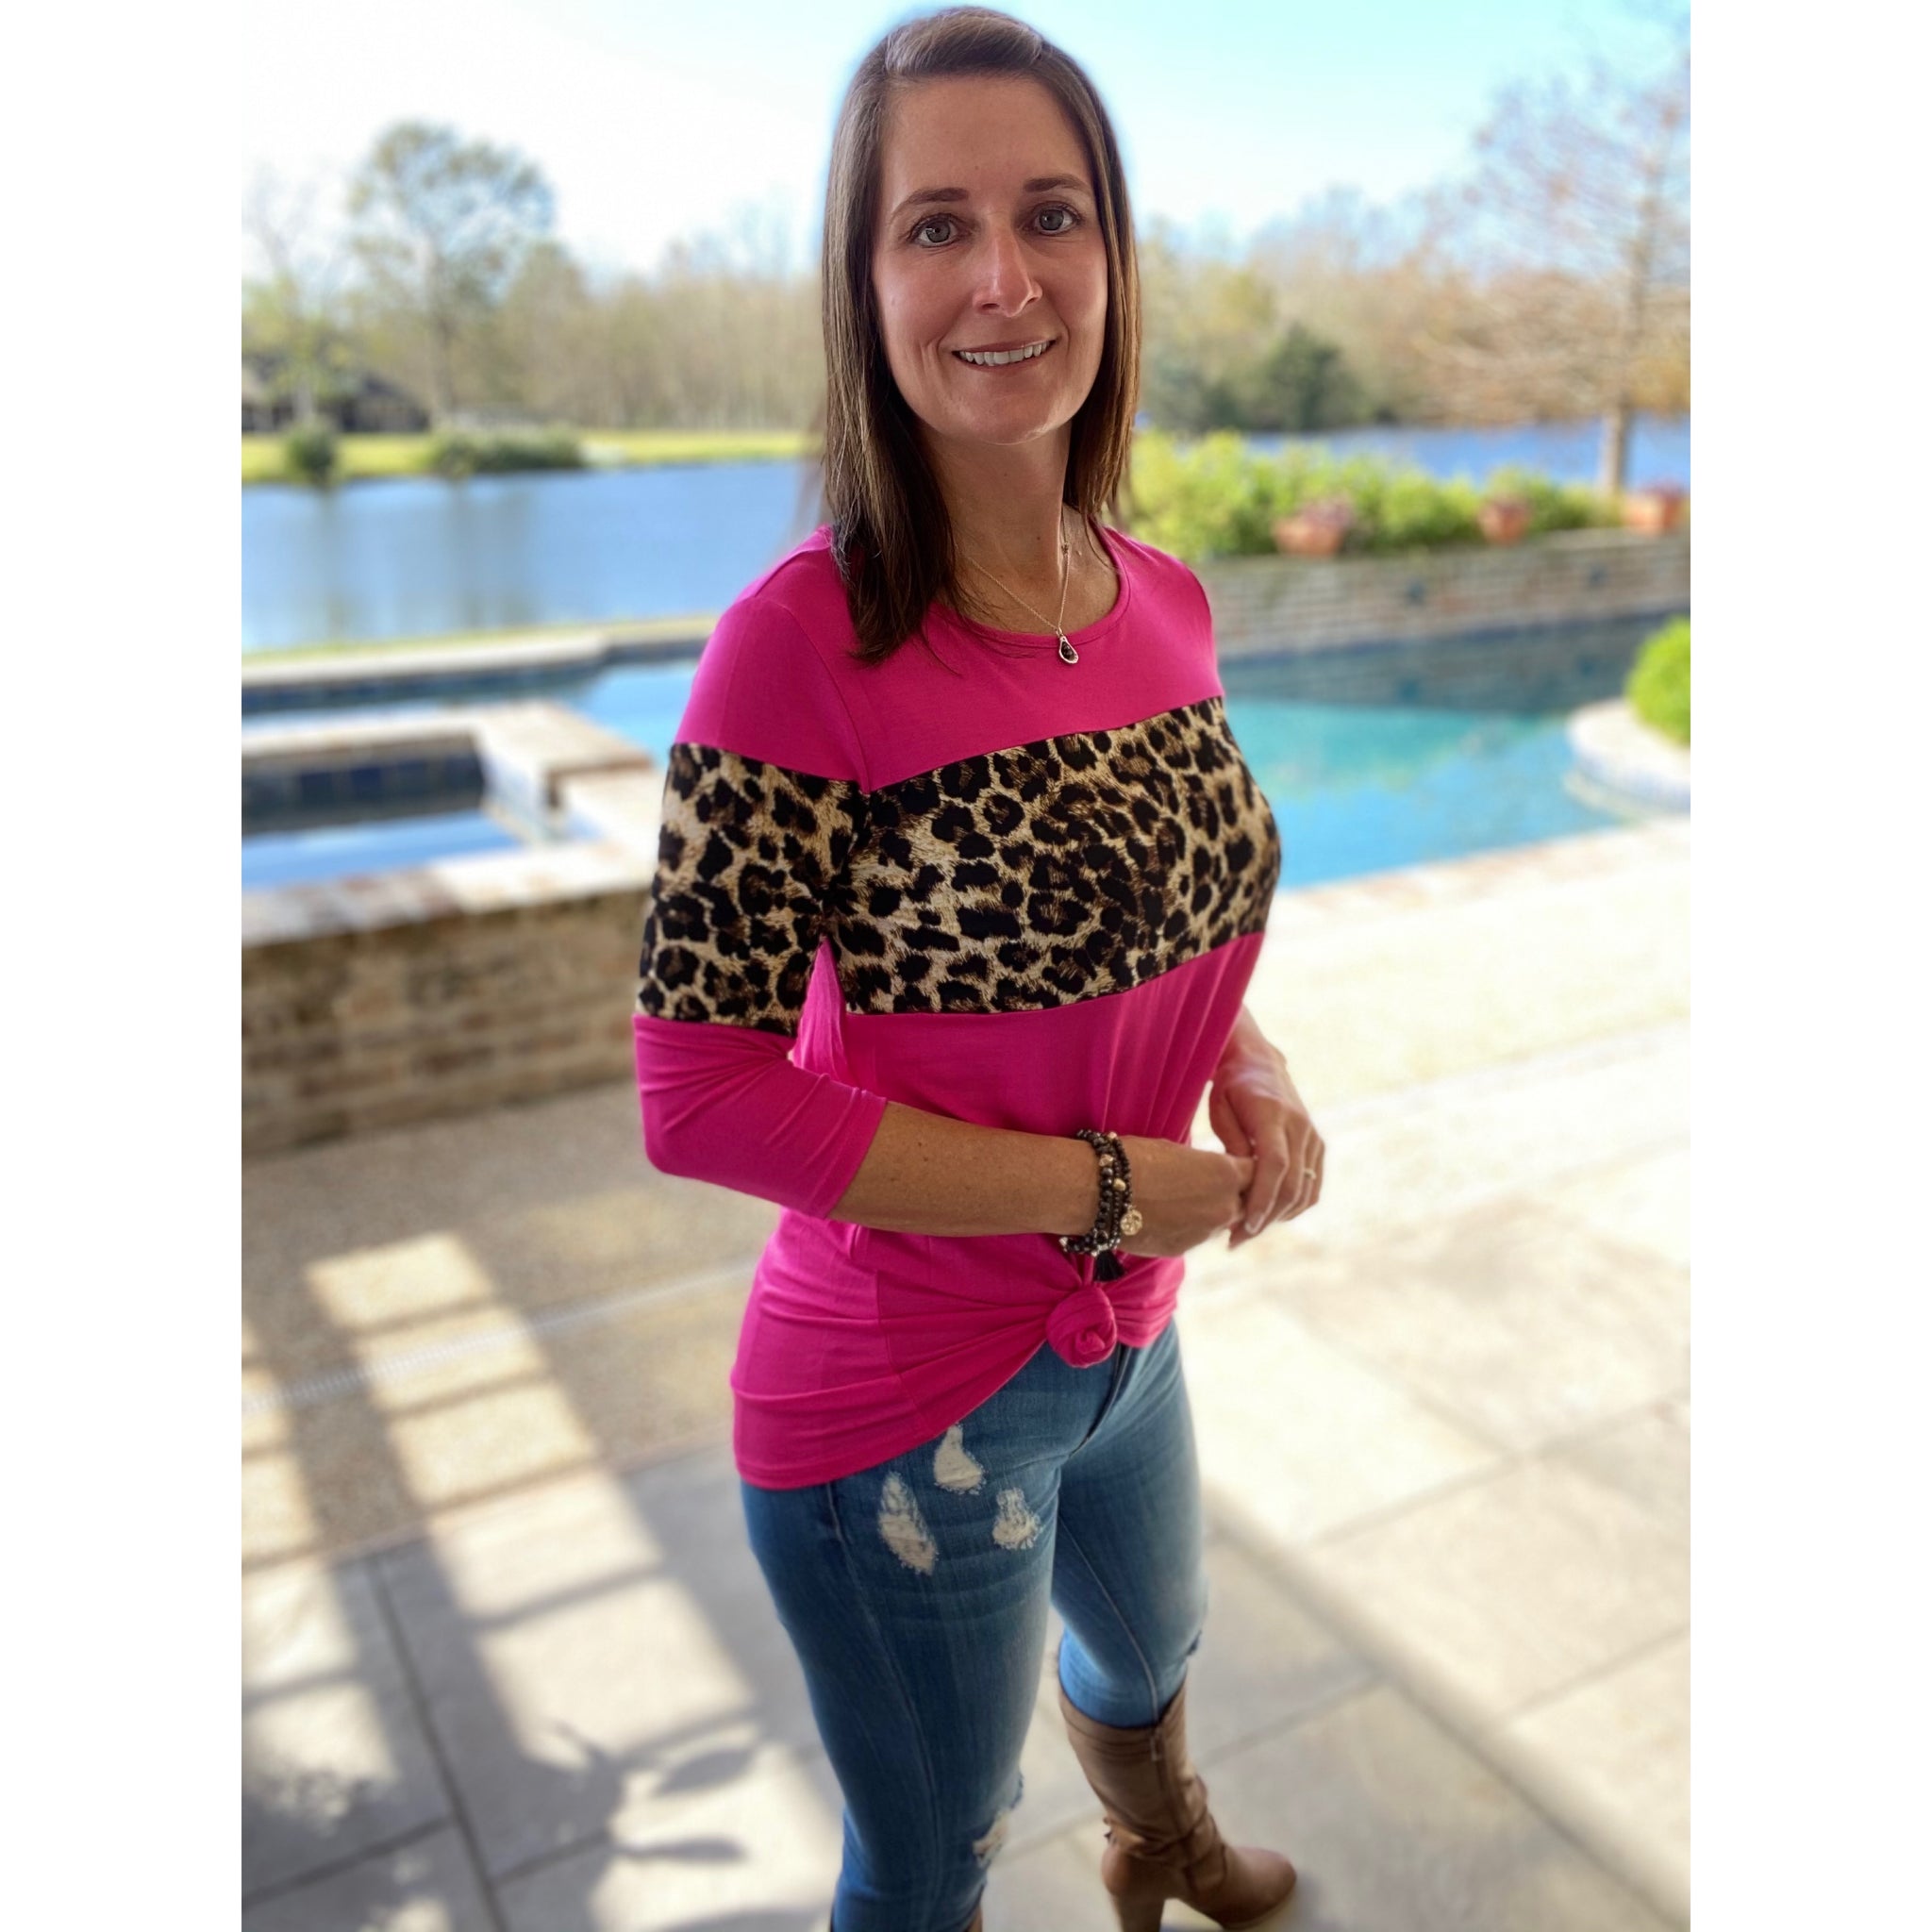 "Never Say Never" Leopard Animal Print Color Block Scoop Neck 3/4 Sleeve Hot Pink